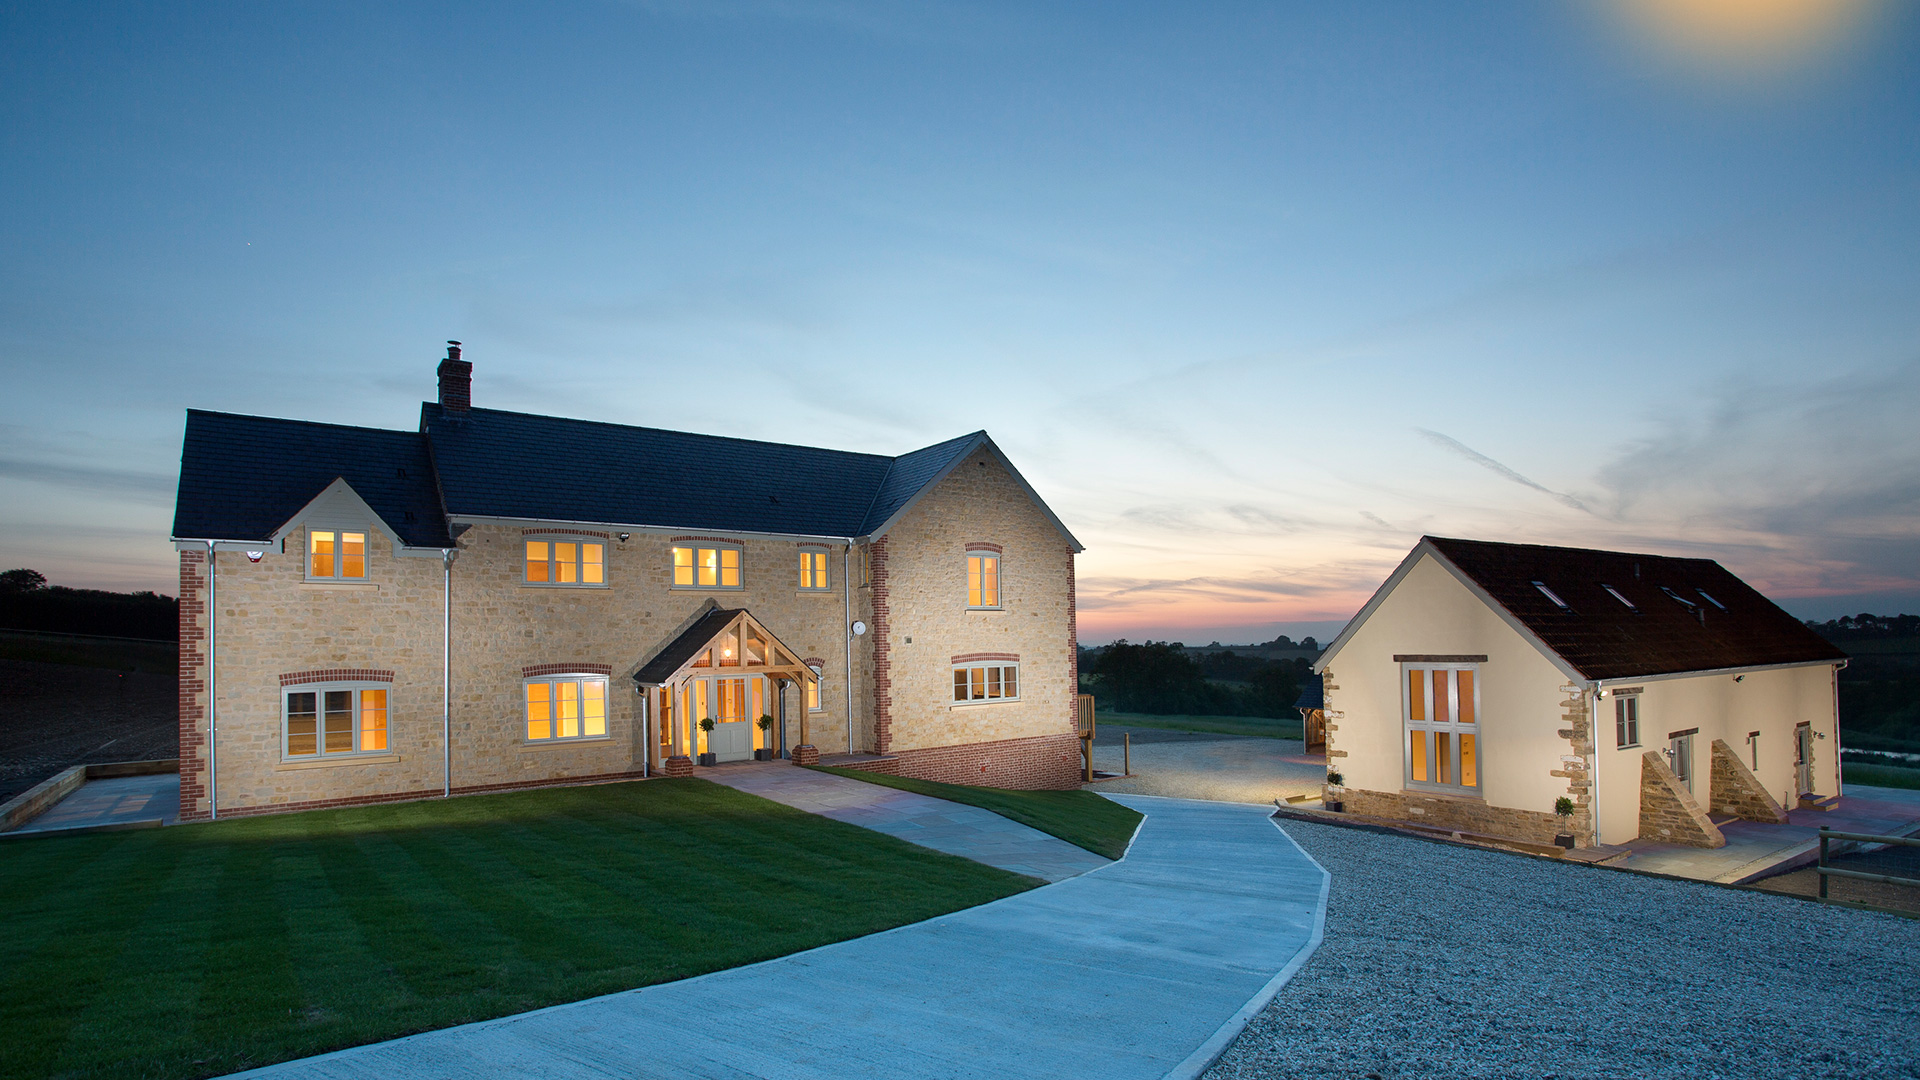 New large farmhouse and outbuilding with lights of at dusk